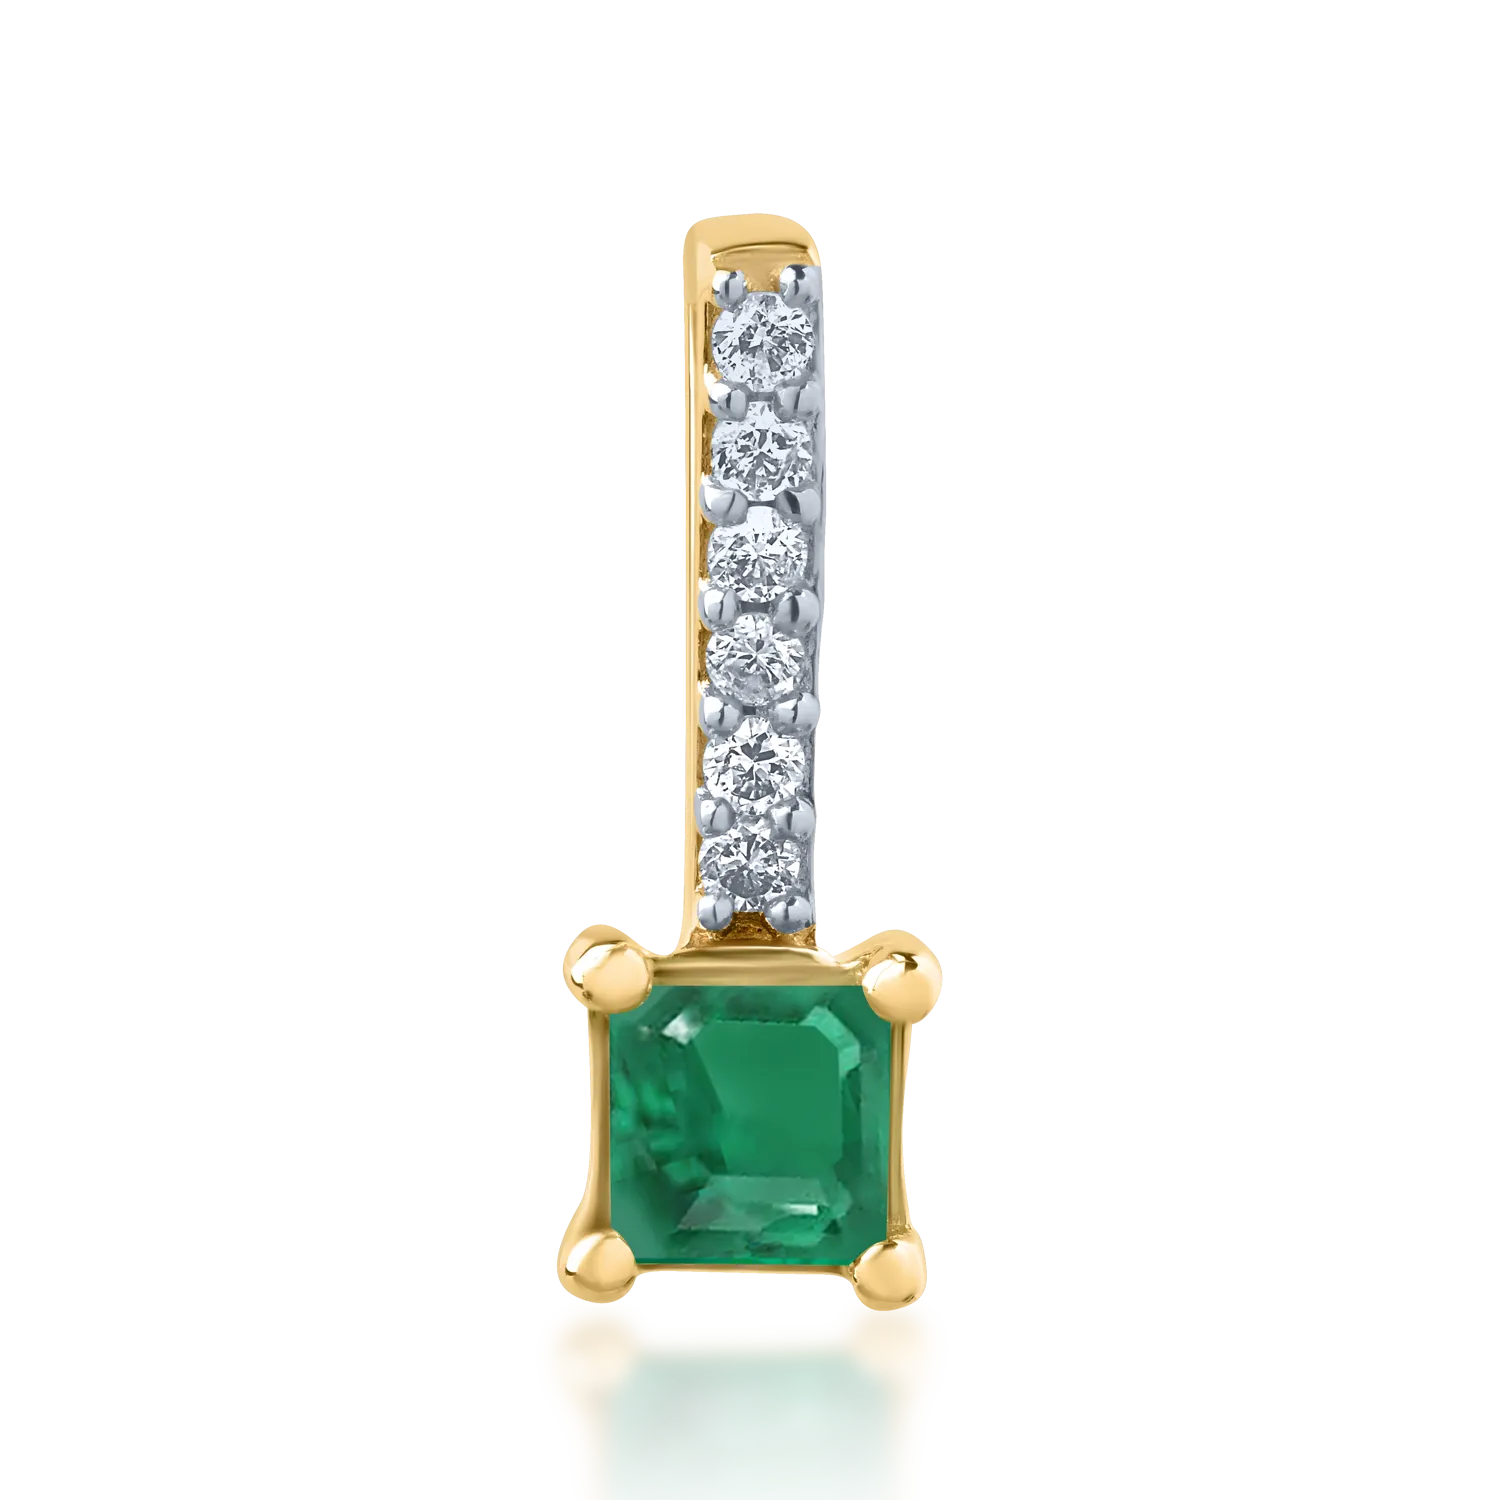 14K yellow gold pendant with a 0.141ct emerald and 0.03ct diamonds